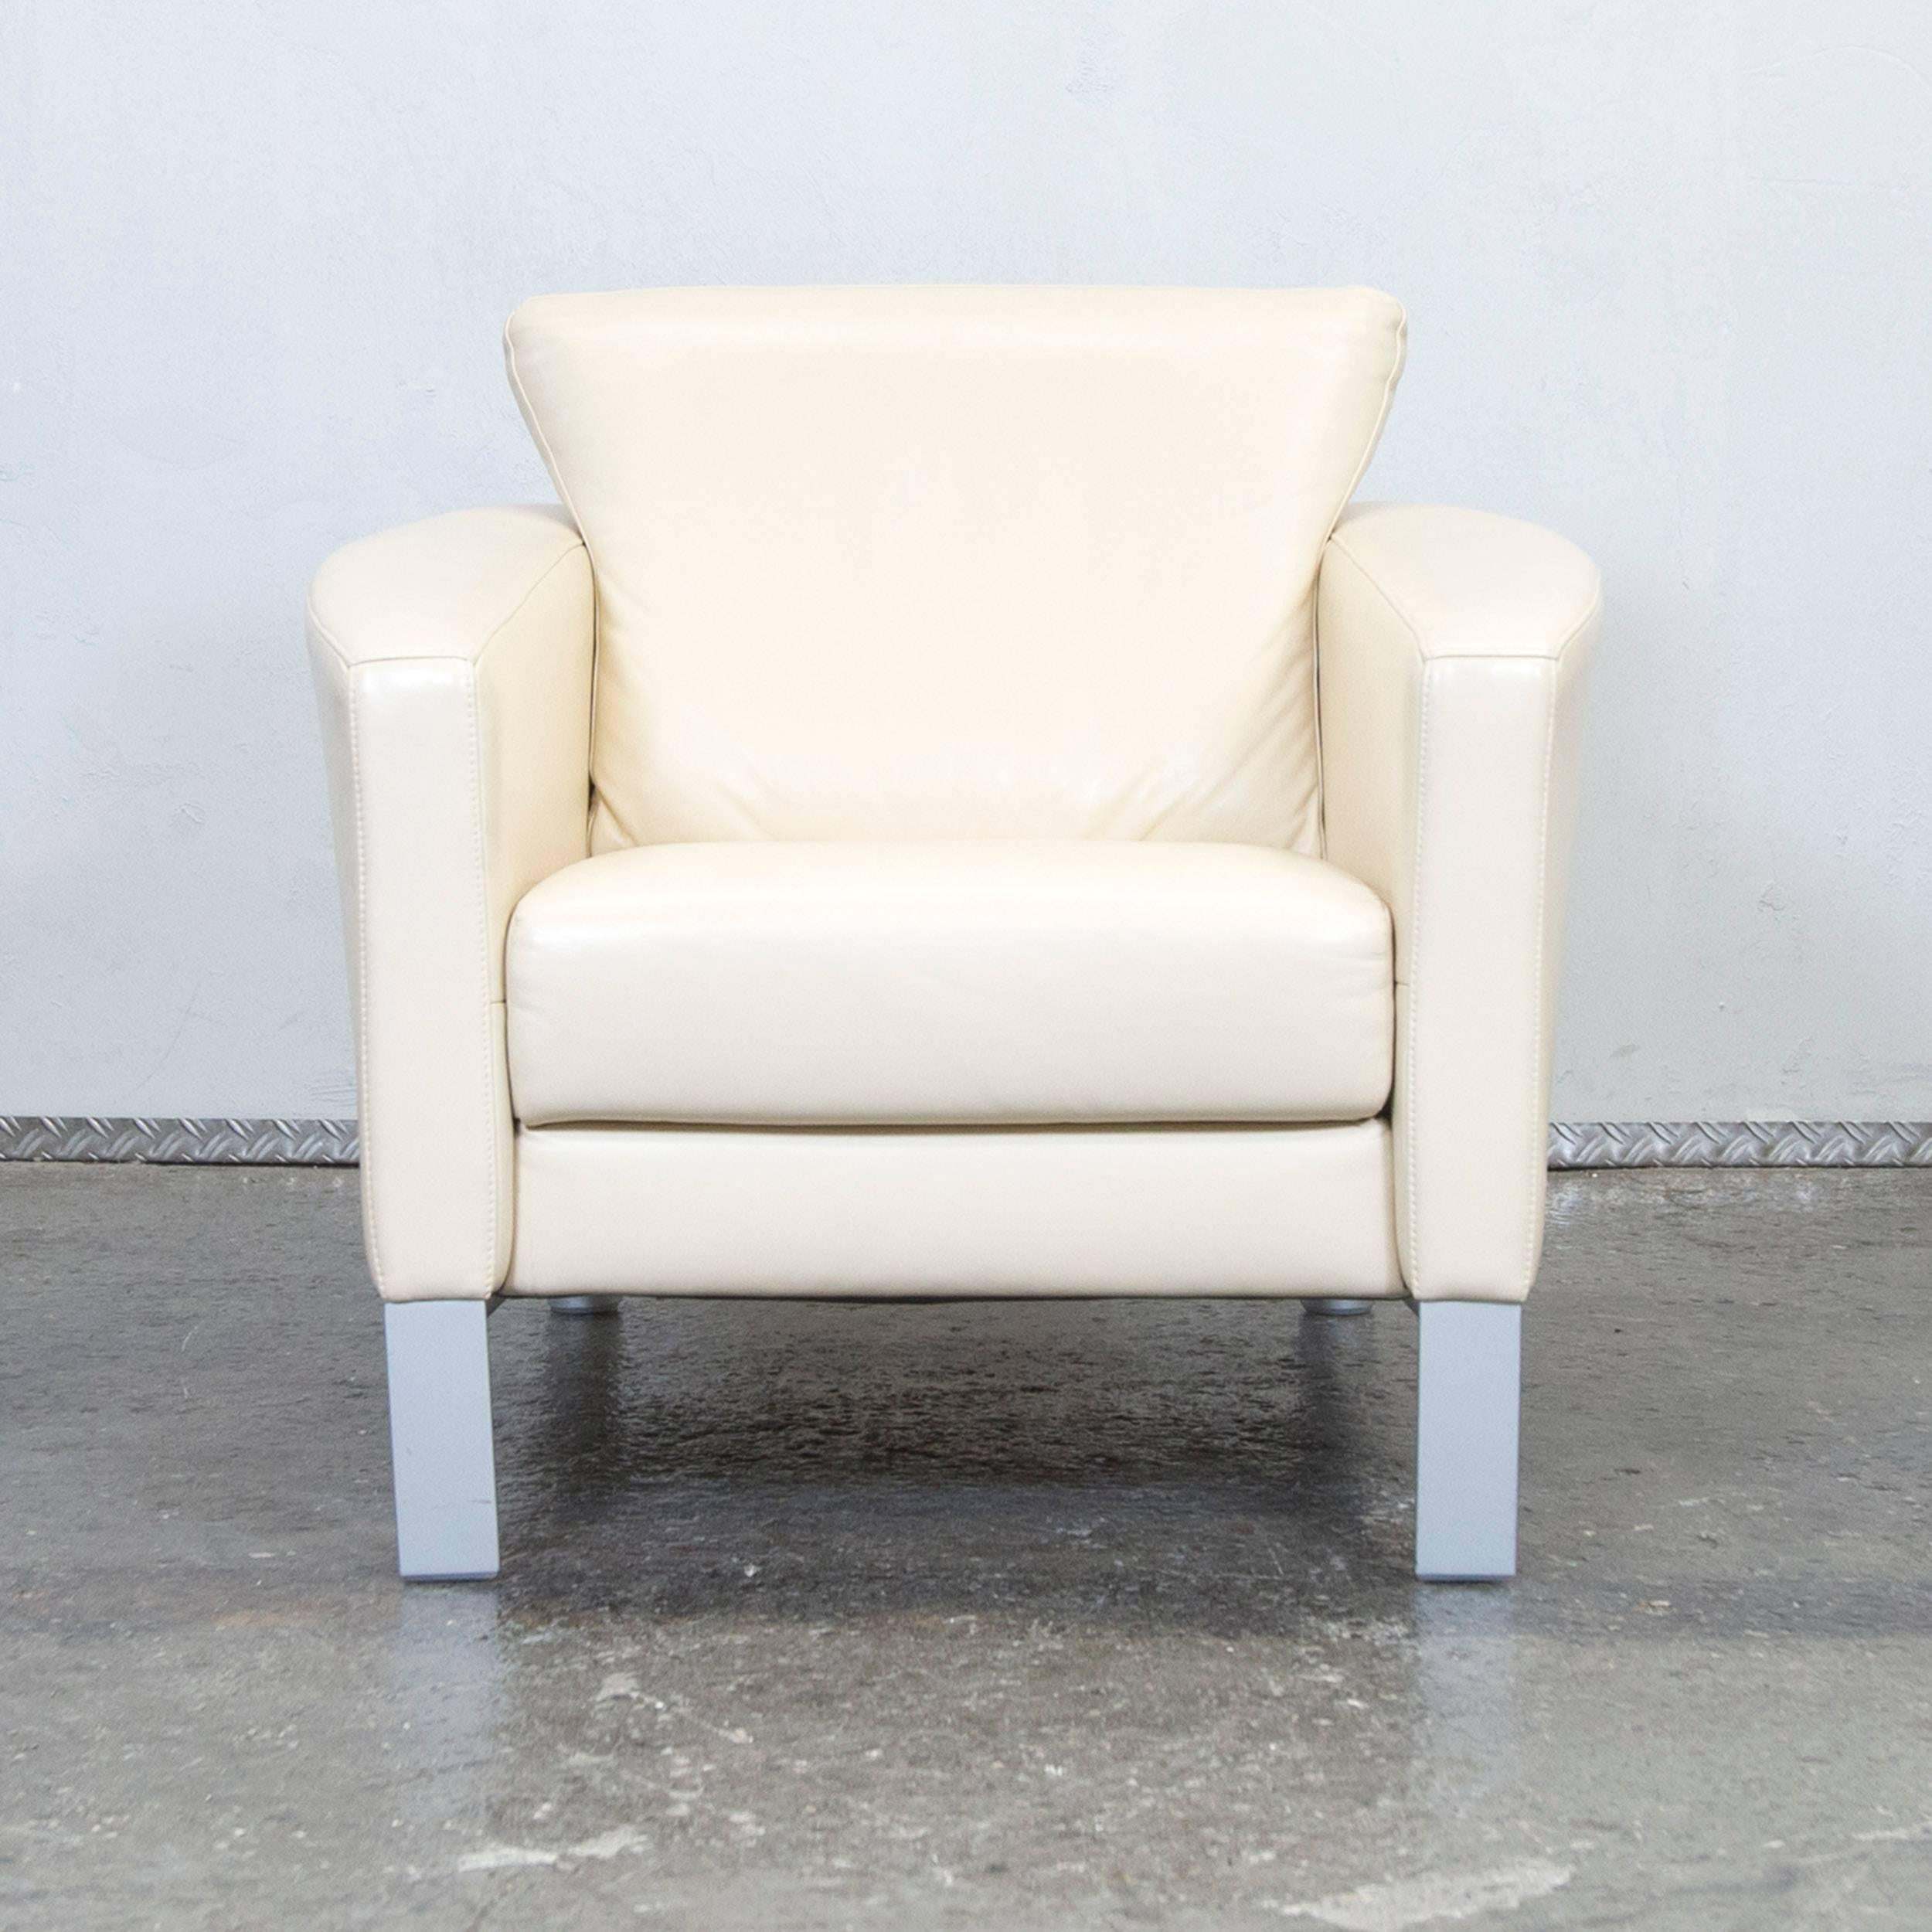 Original crème colored Rolf Benz leather armchair with a minimalistic and modern style.